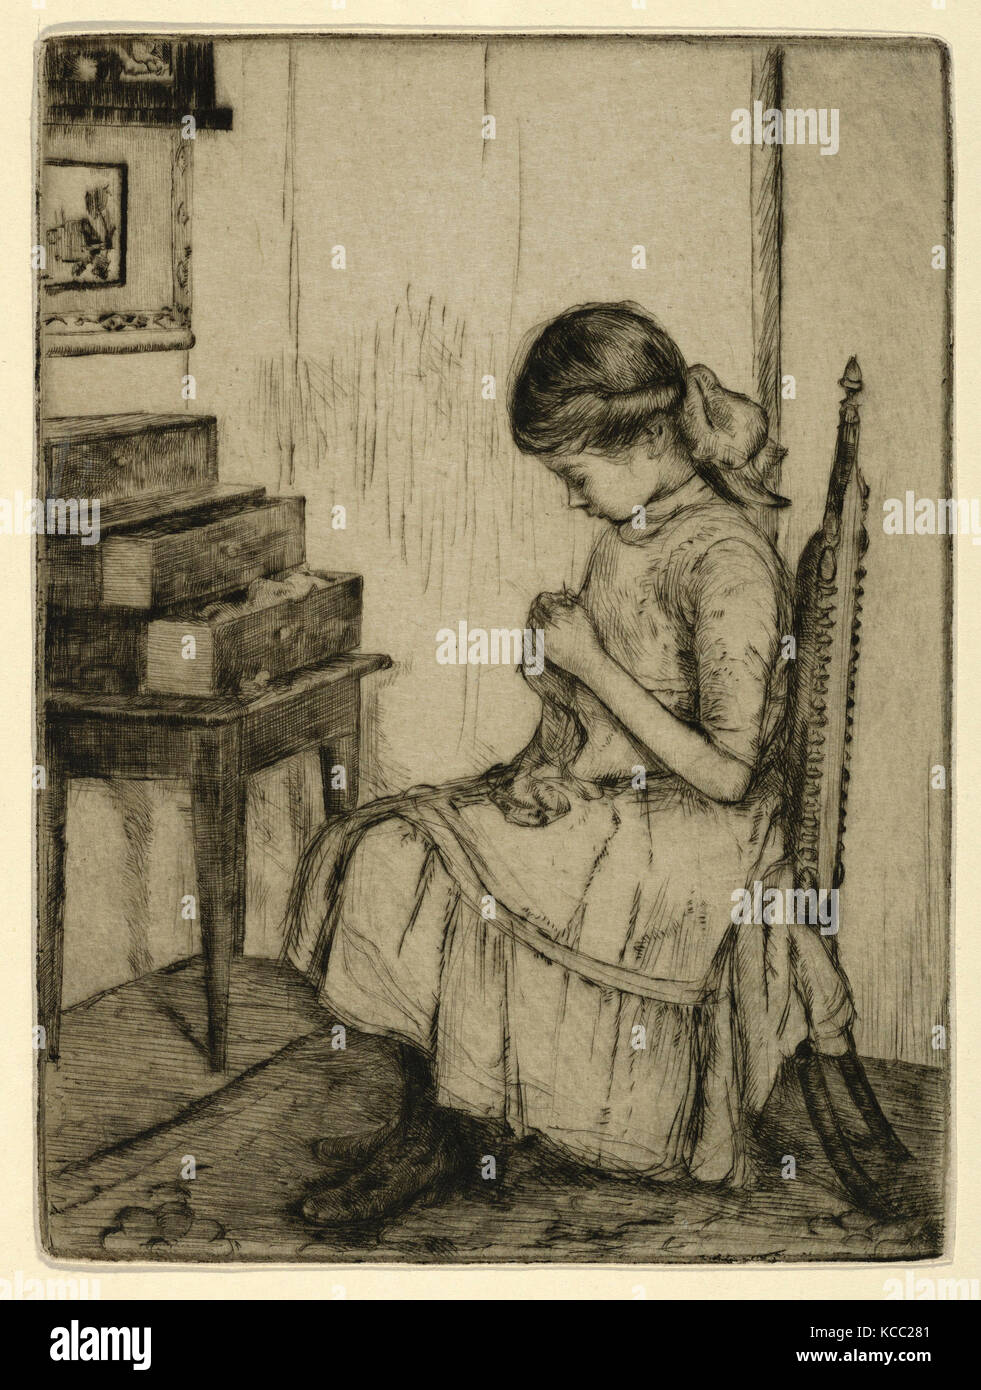 Drawings and Prints, Print, Darning, Artist, Ernest Haskell, American, Woodstock, Connecticut 1876–1925 West Point, Maine Stock Photo